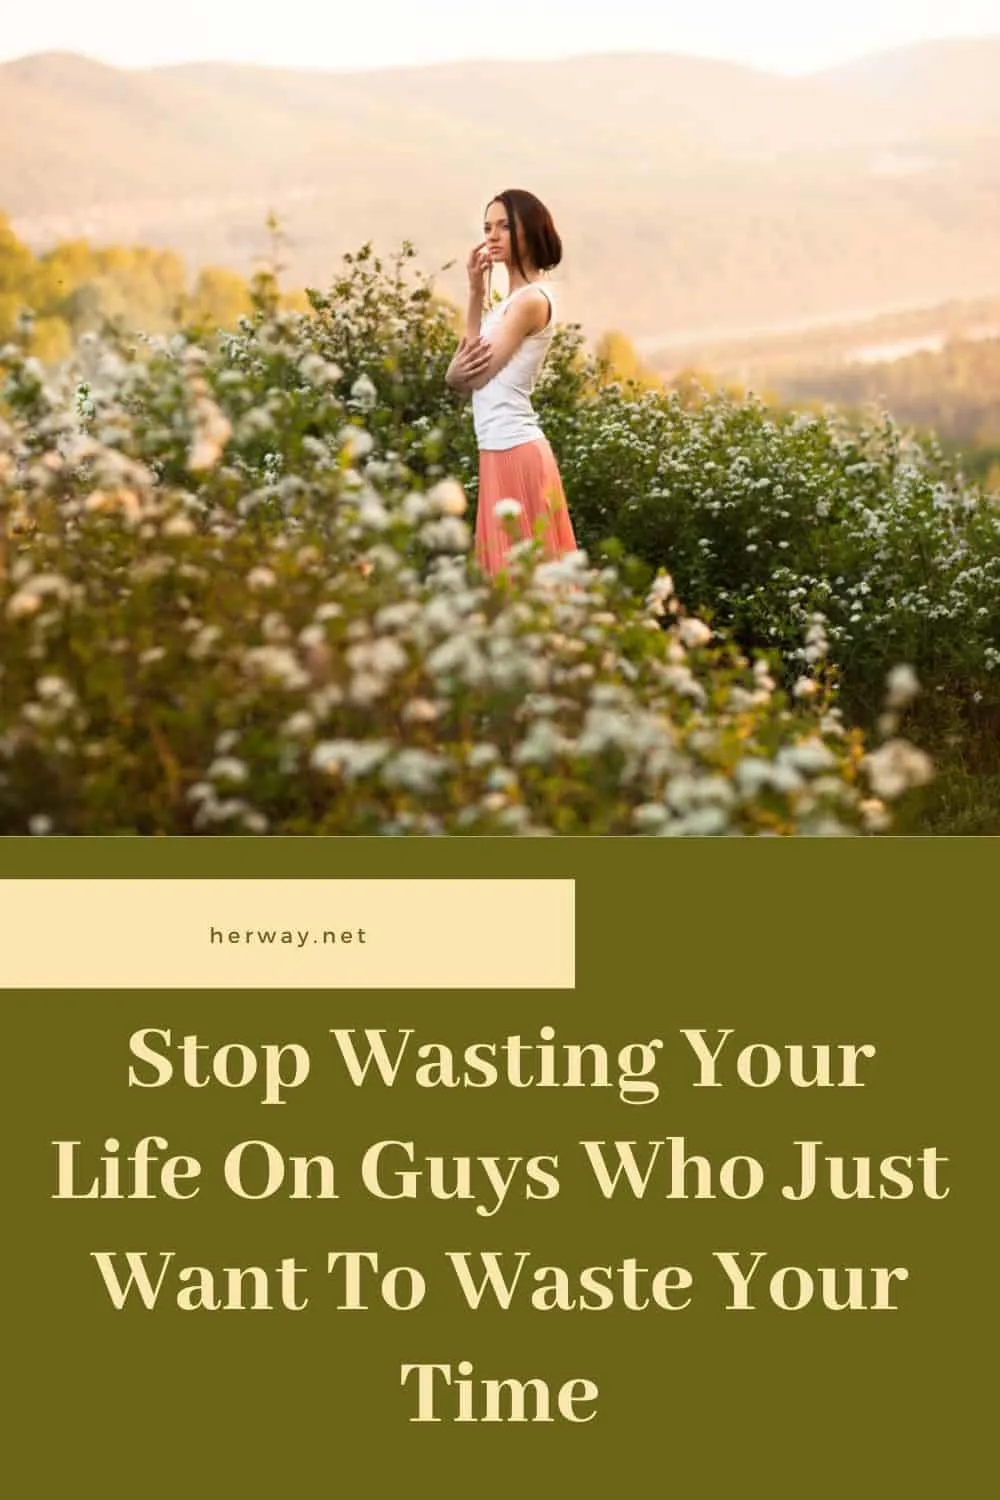 Stop Wasting Your Life On Guys Who Just Want To Waste Your Time